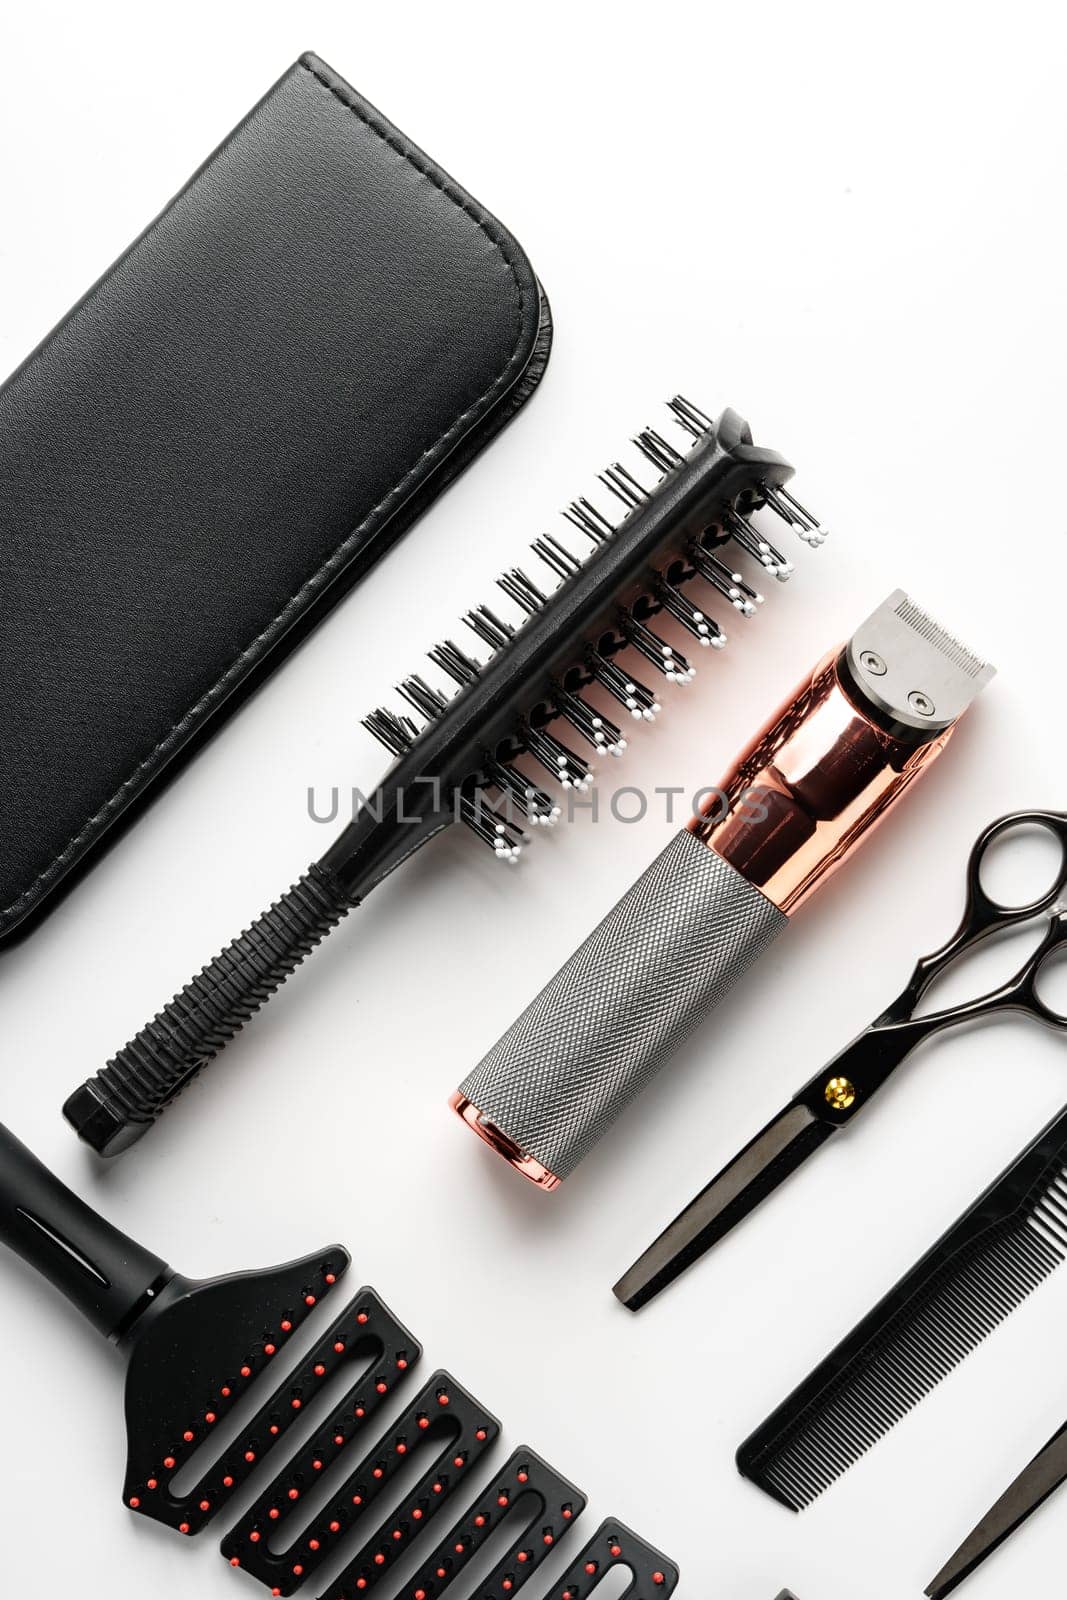 Set of barber tools for haircut on gray background flat lay studio shot